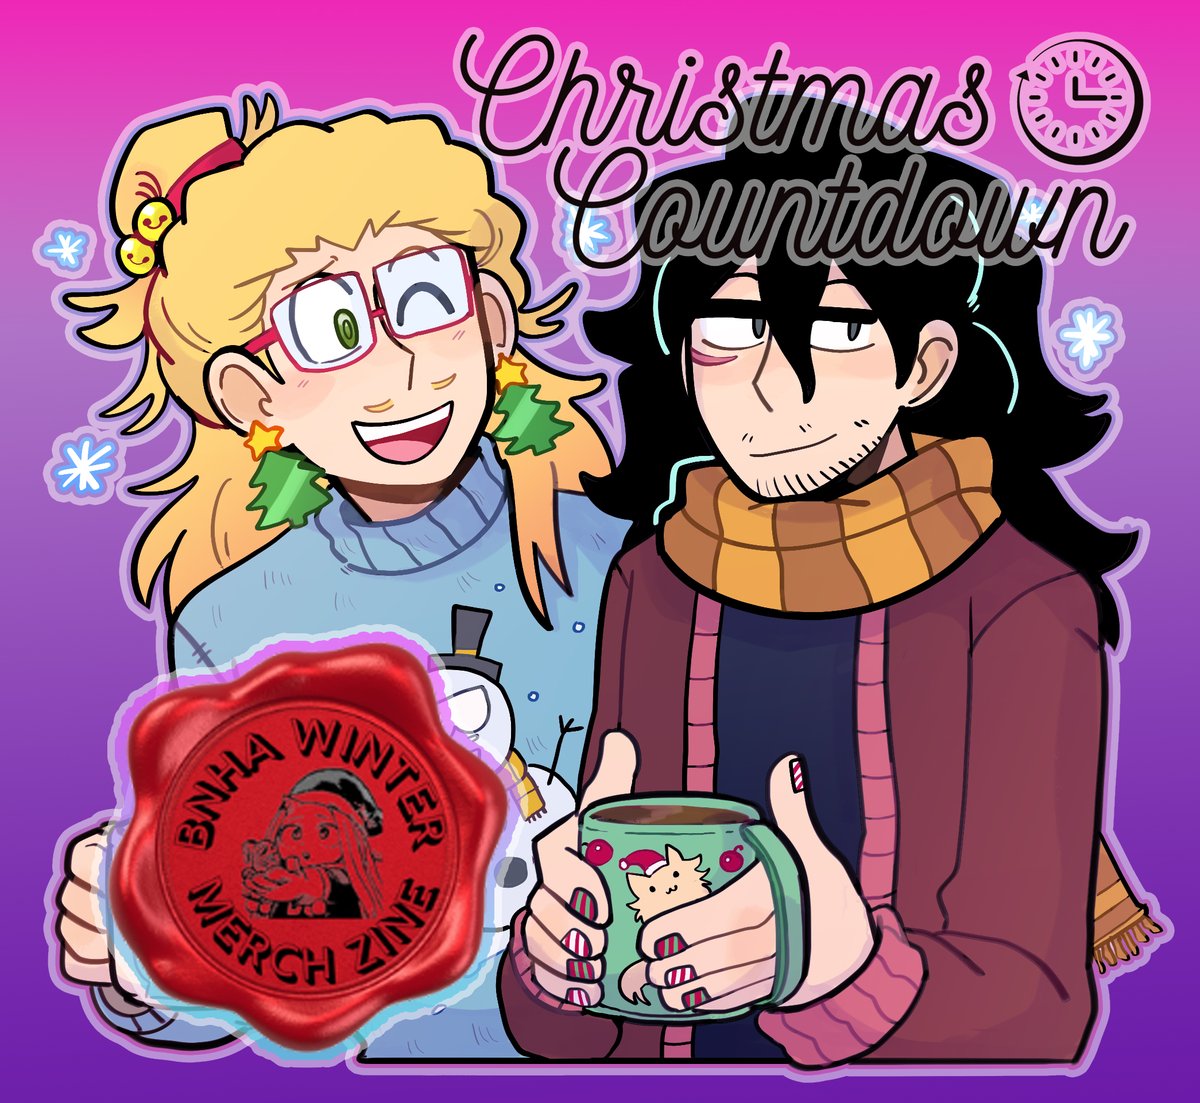 hey guys!! just another quick promo for the wonderful christmas zine I got to be a part of 💙@bnhaxmaszine 💙 If you wanna snag the double sided keychain I designed then pick up a bundle! (link below!)